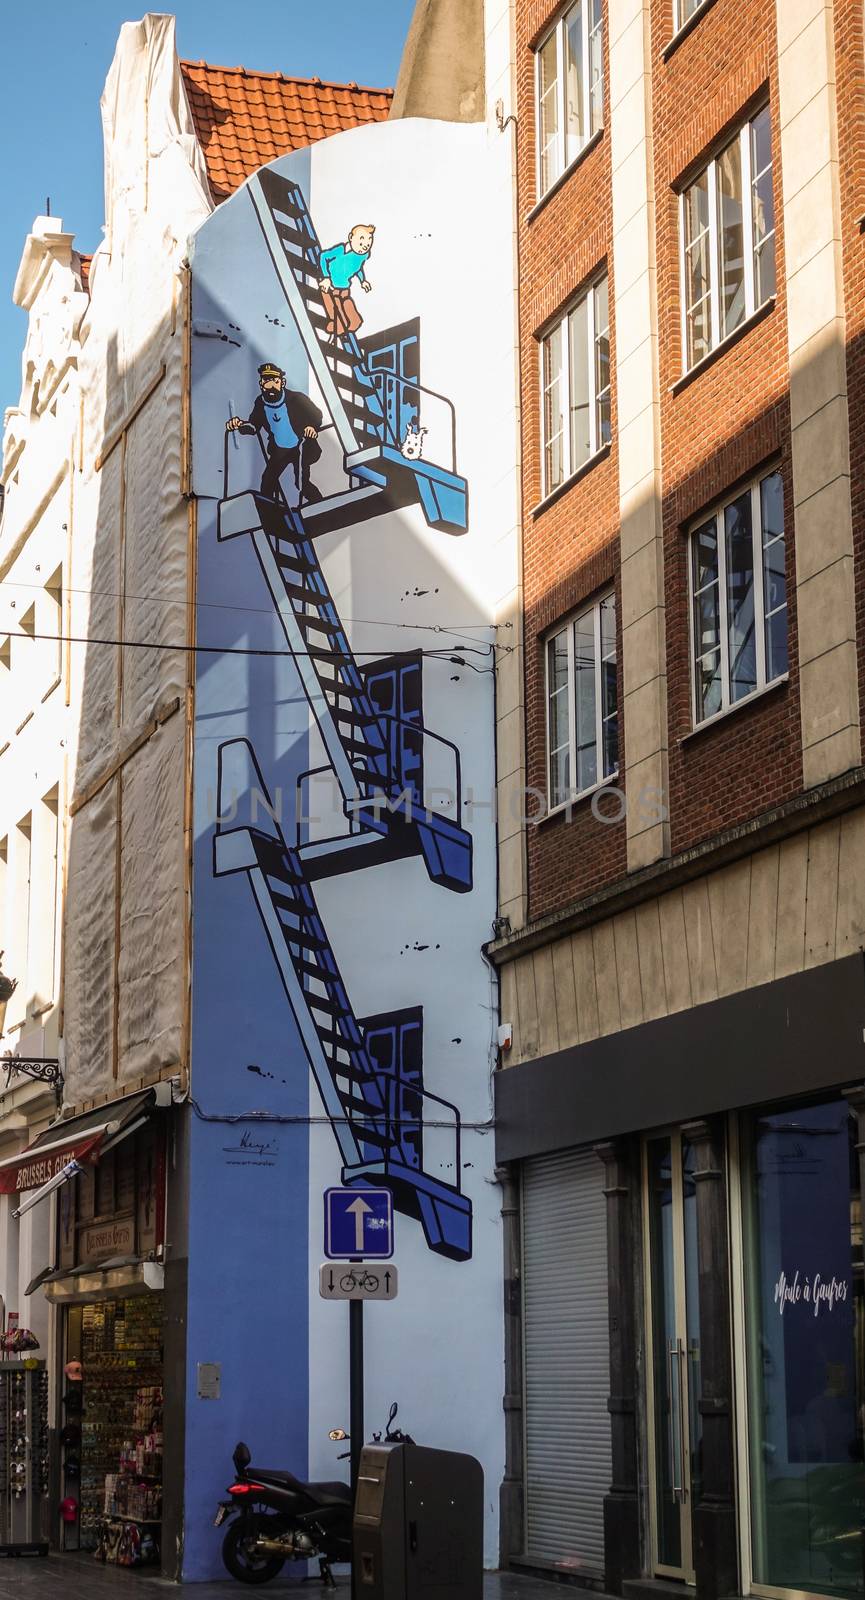 Brussels, Belgium - June 22, 2019: Tintin themed blue-white wall painting of stairway on side facade of house in Rue de l’Etuve.